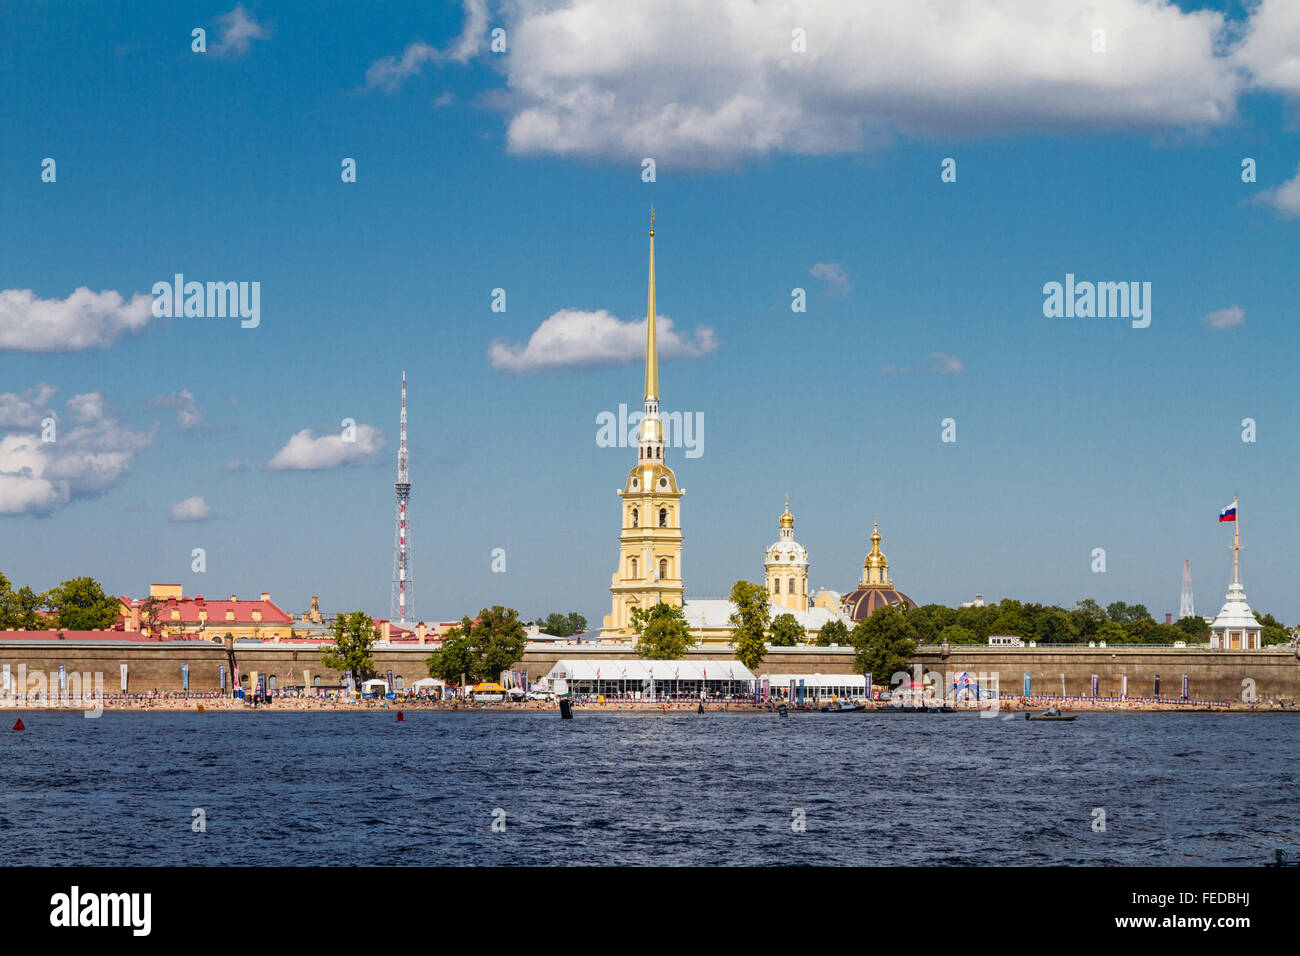 The Peter and Paul Fortress, St Petersburg. Russia Stock Photo